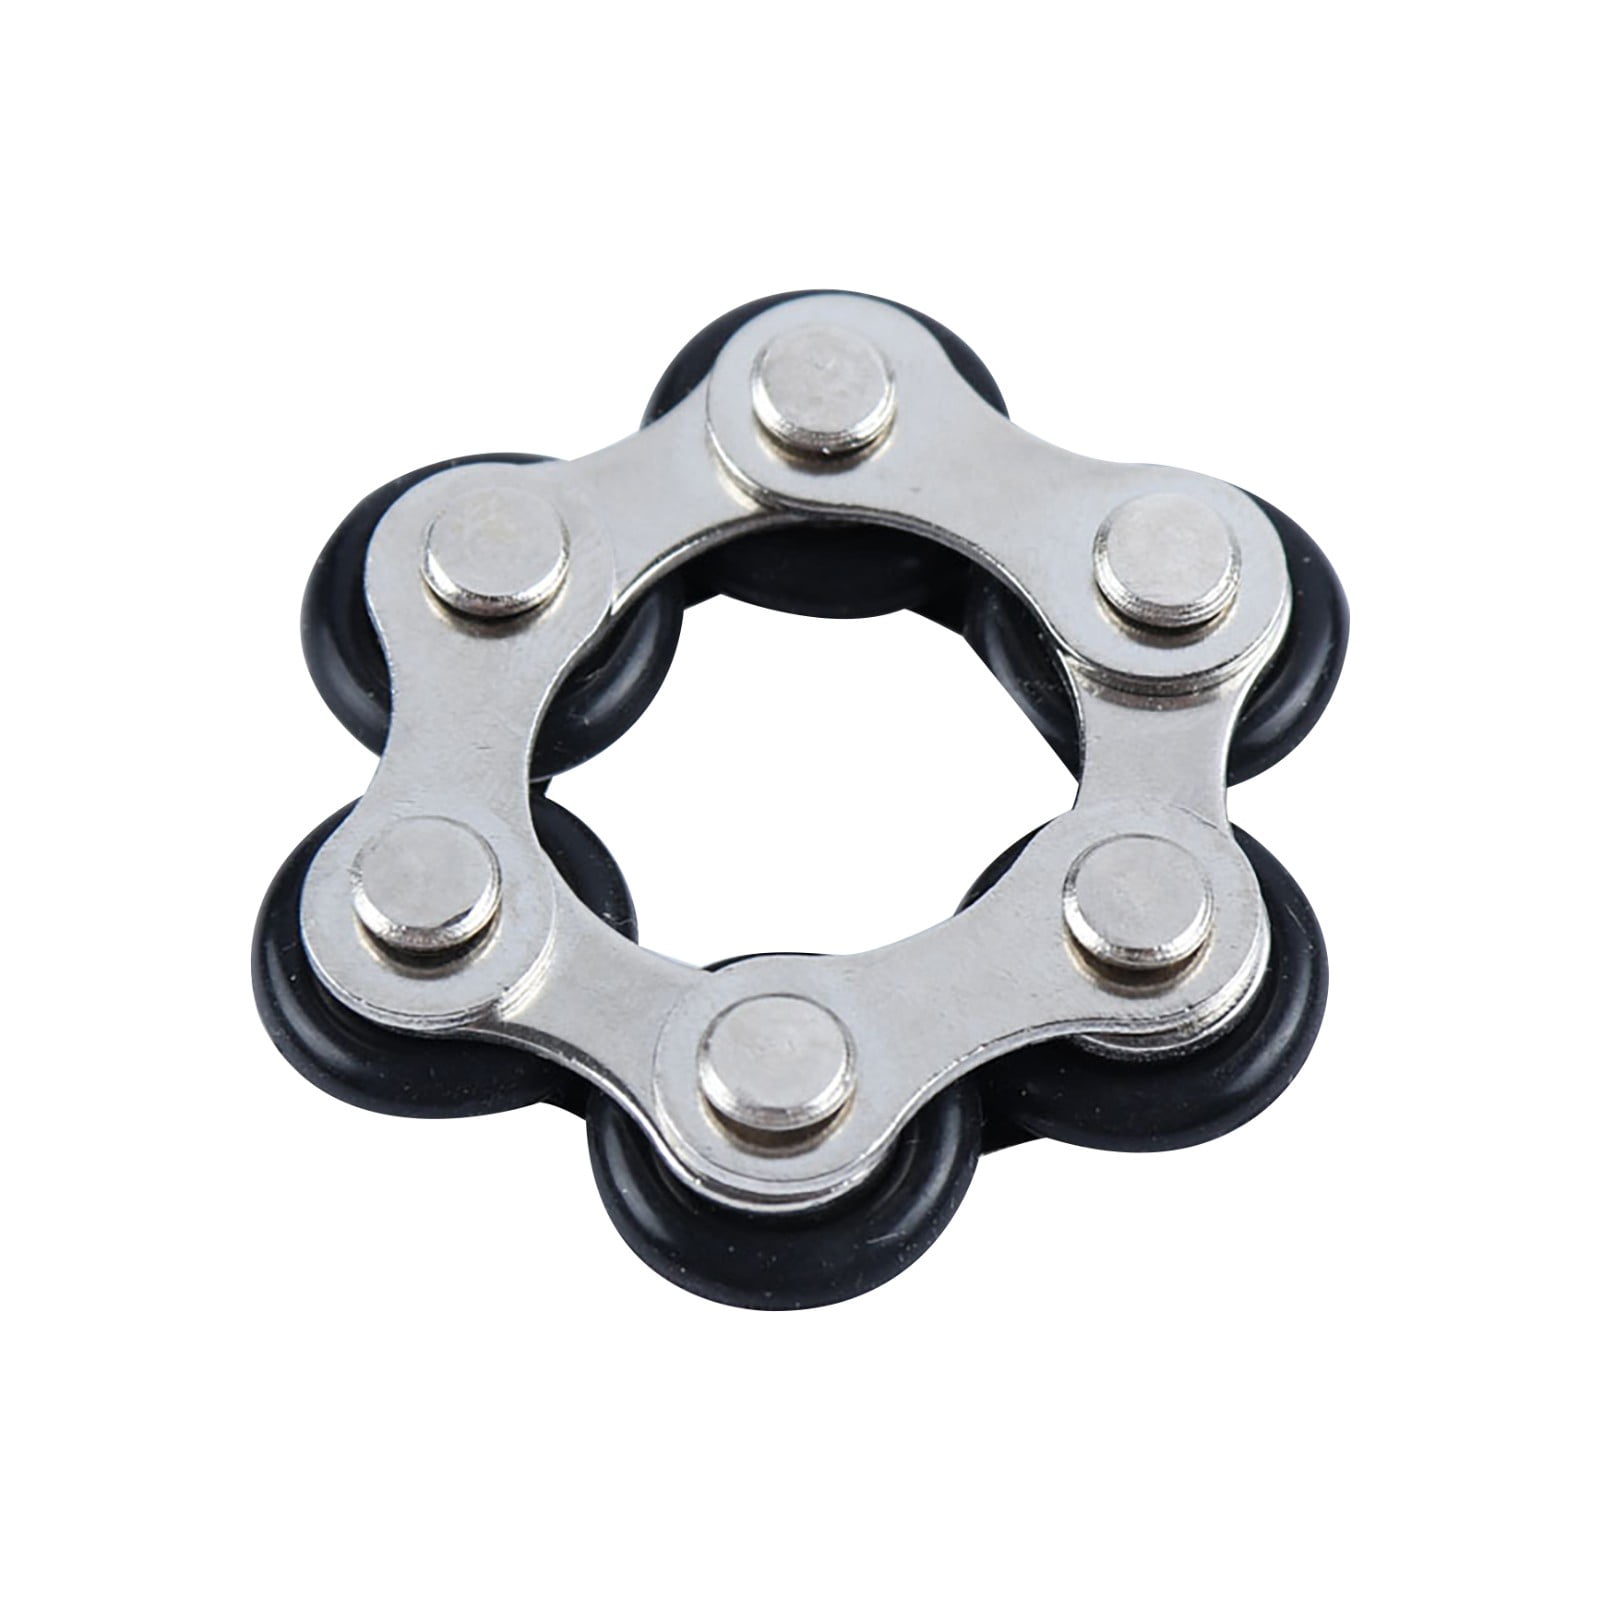 Chain Fidget Toy Hand Spinner Key Ring Sensory Toys Relieve Hot Stress P8N8 